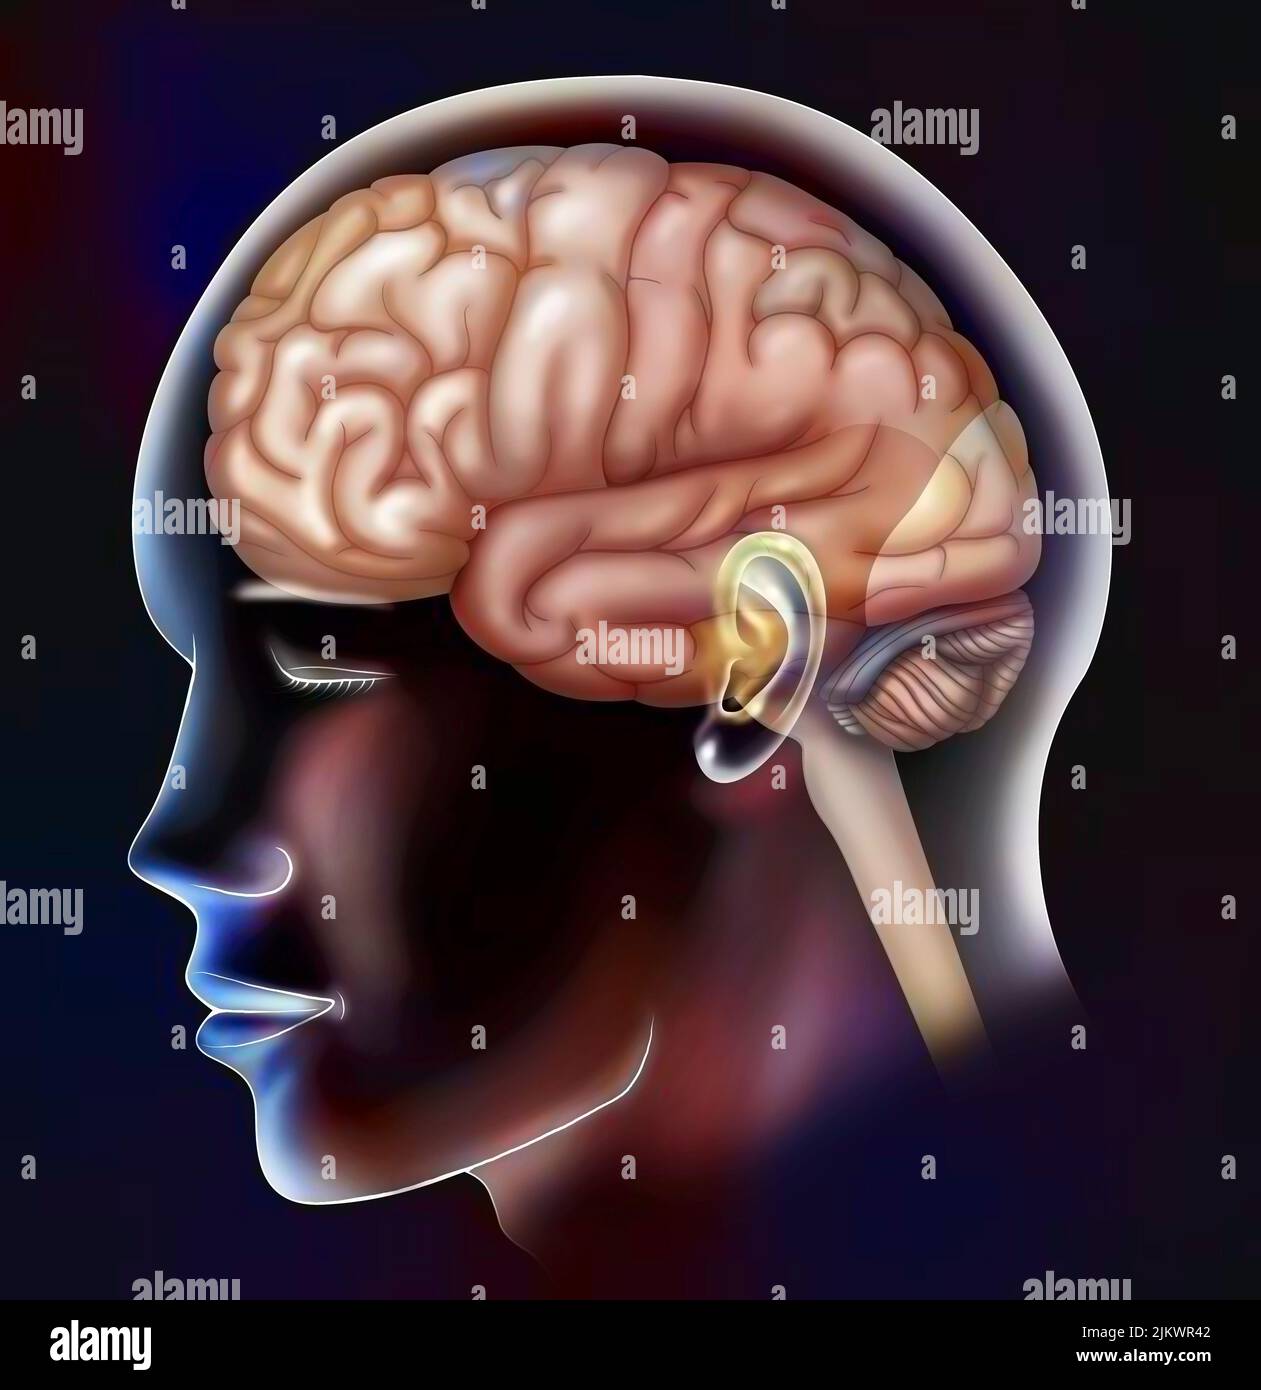 The lobes of the brain: frontal, parietal, temporal and occipital lobes. Stock Photo